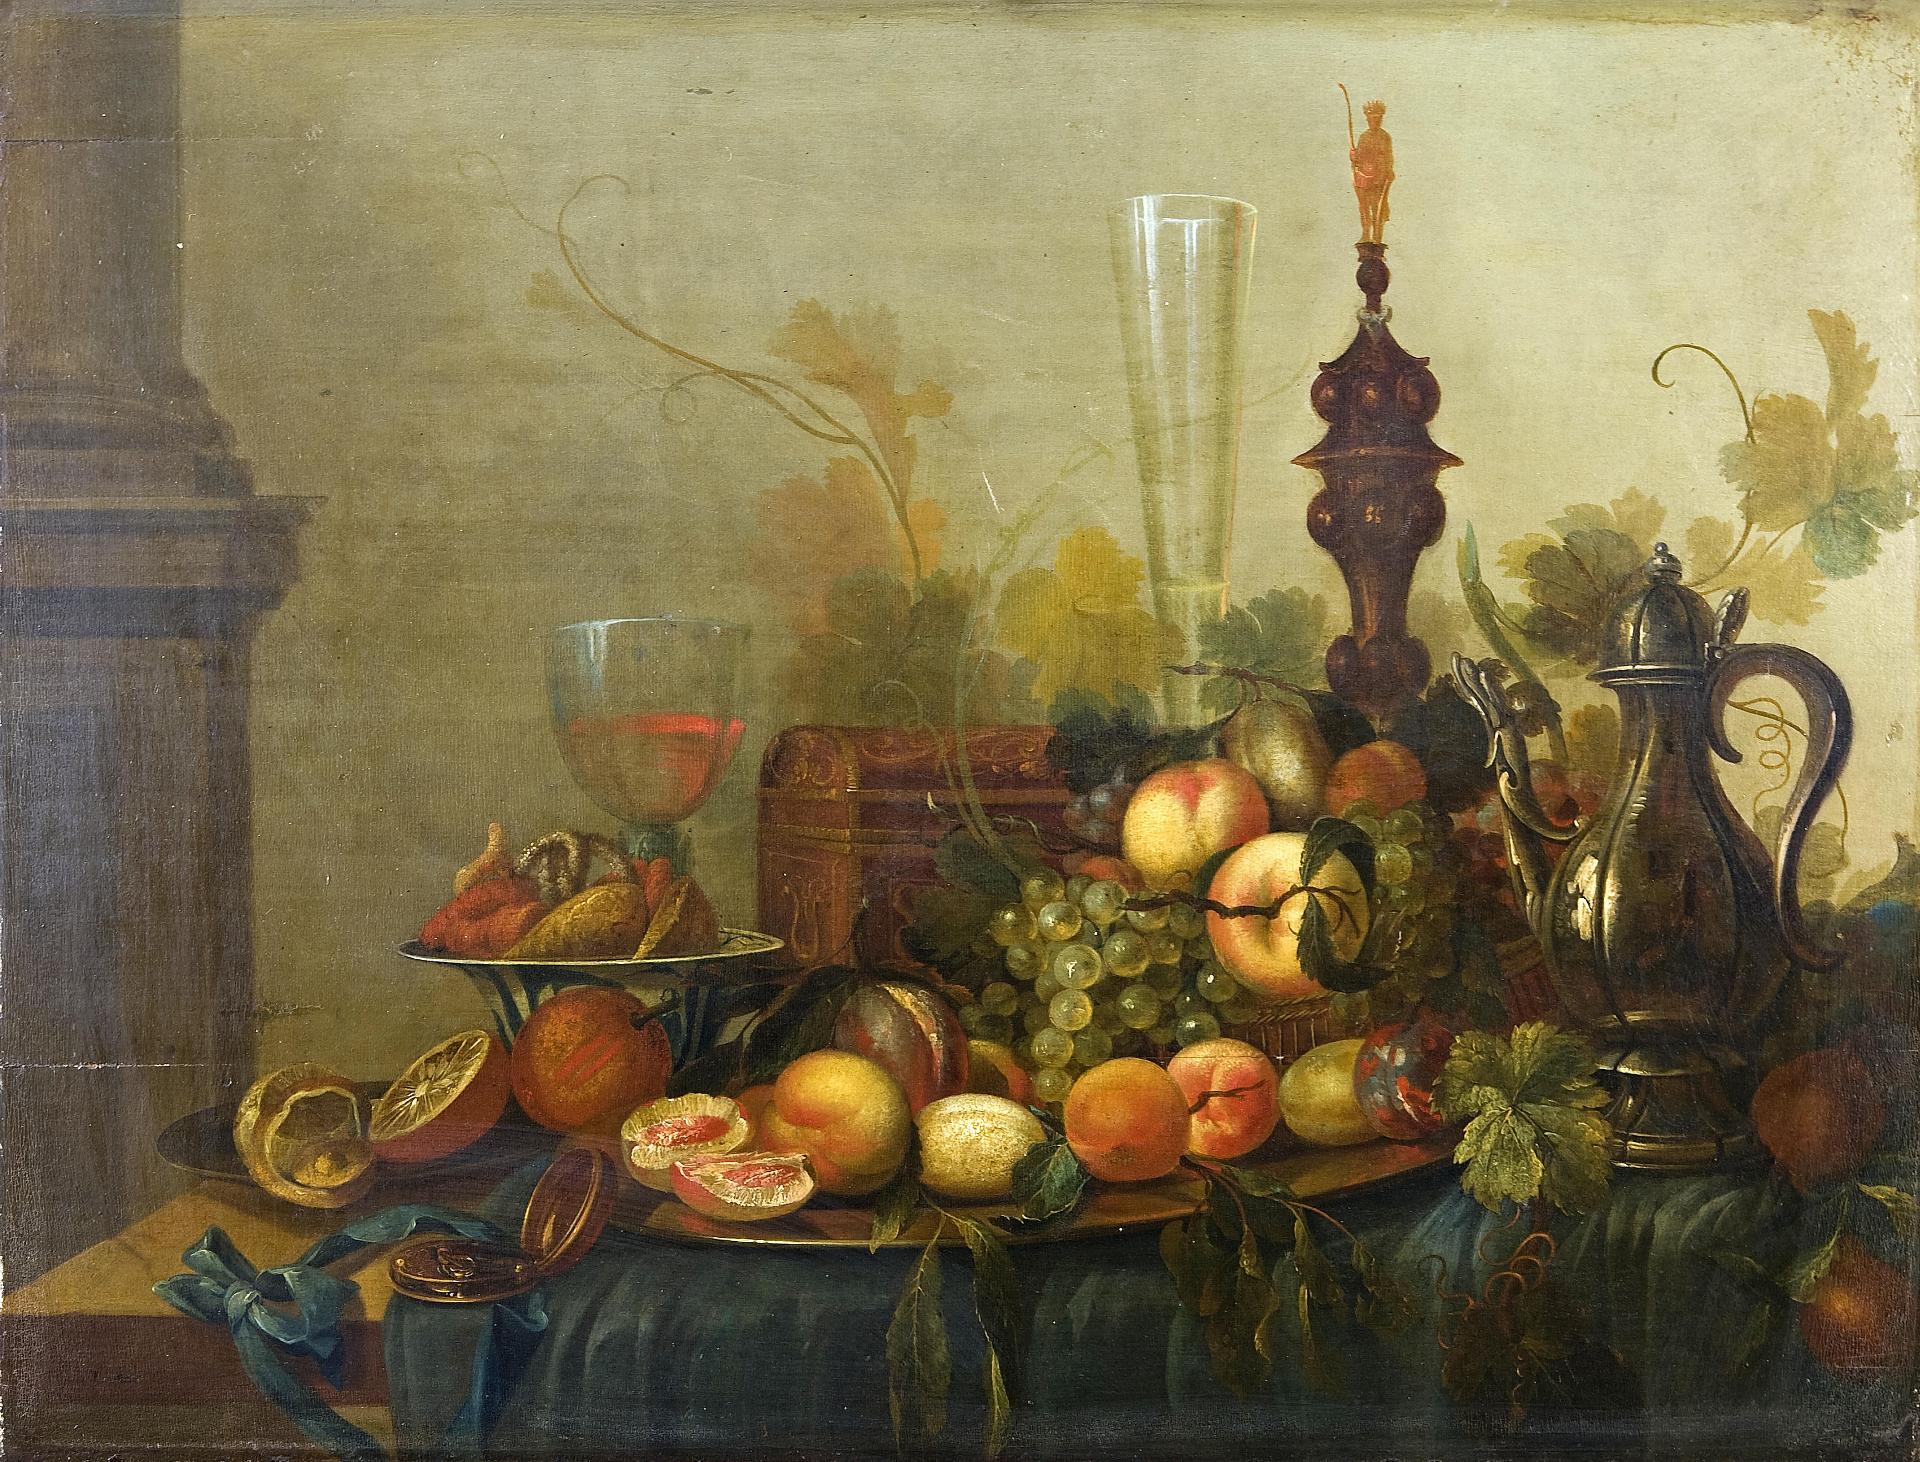 George Lance (1802-1864) - Still life with fruit, glass and metalware